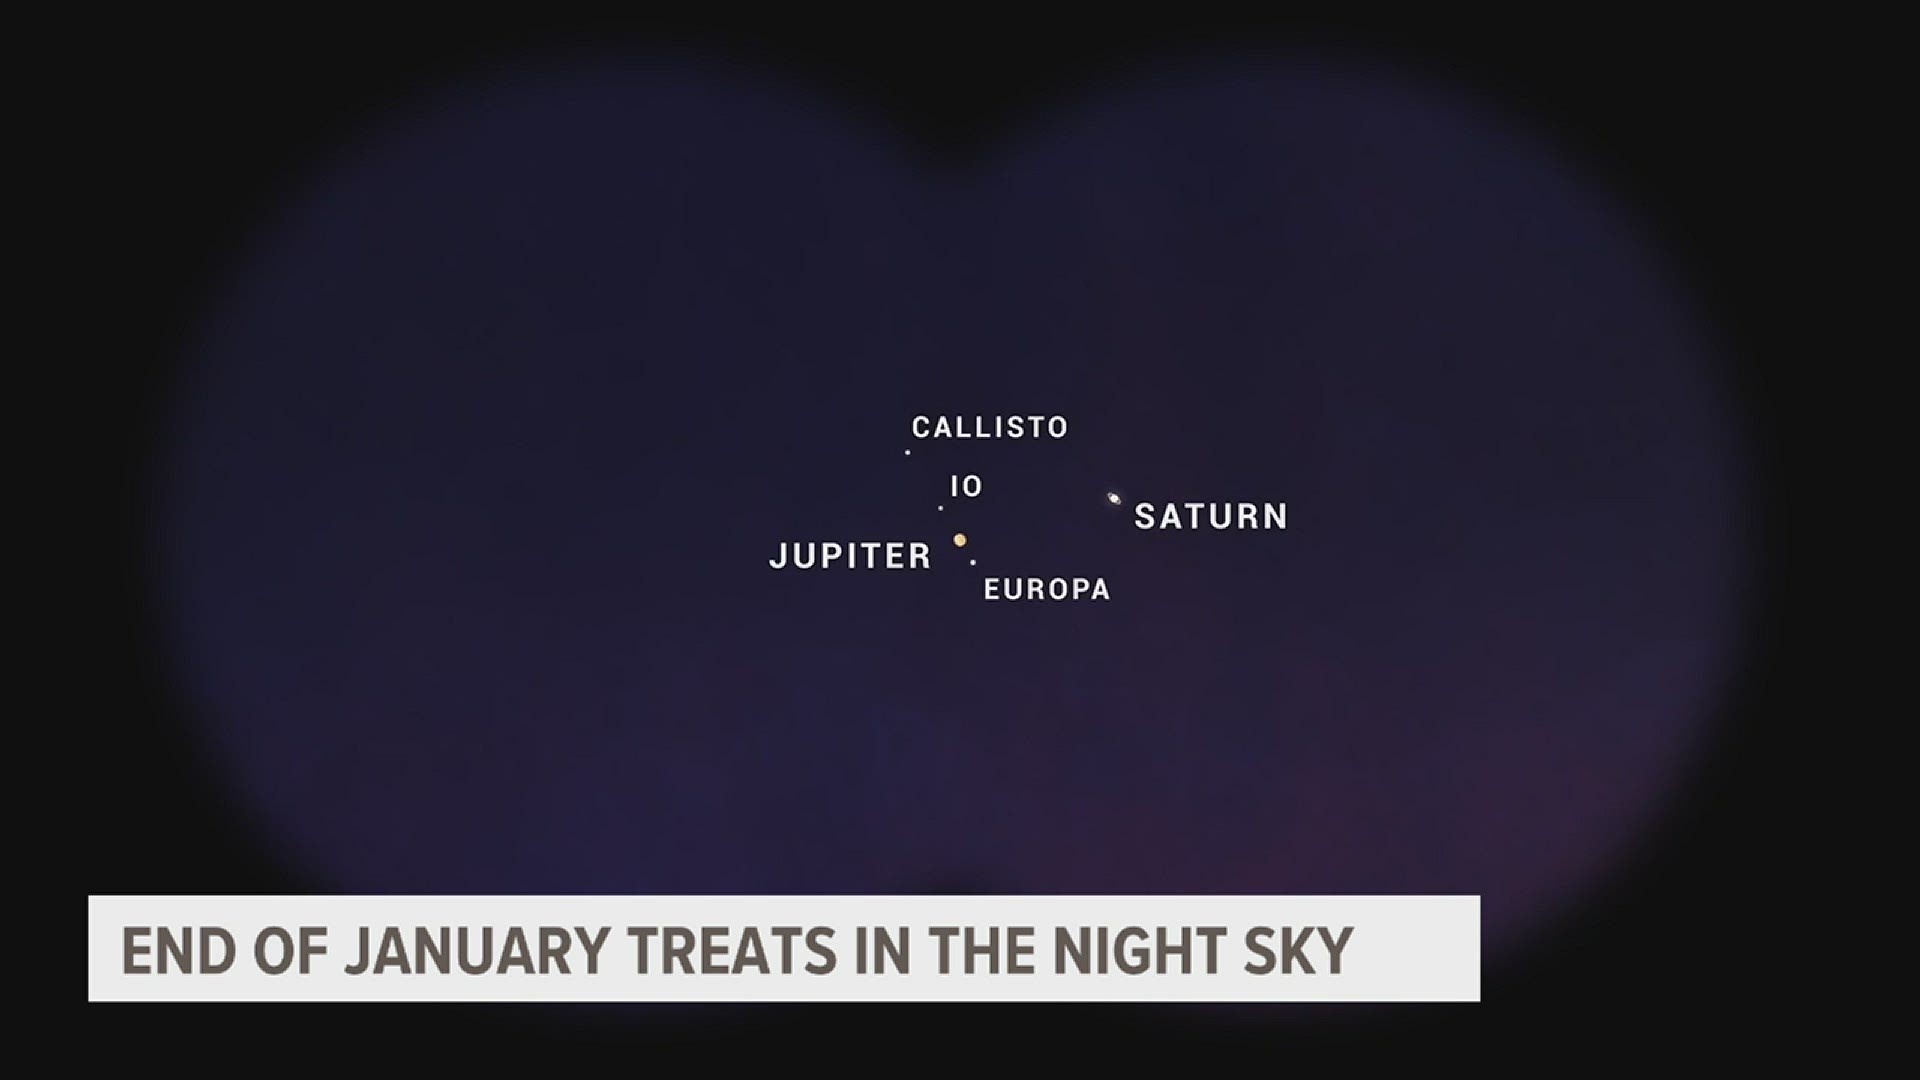 Over the next couple of nights, we'll get to see the Moon, Mars, and Uranus together in the night sky!